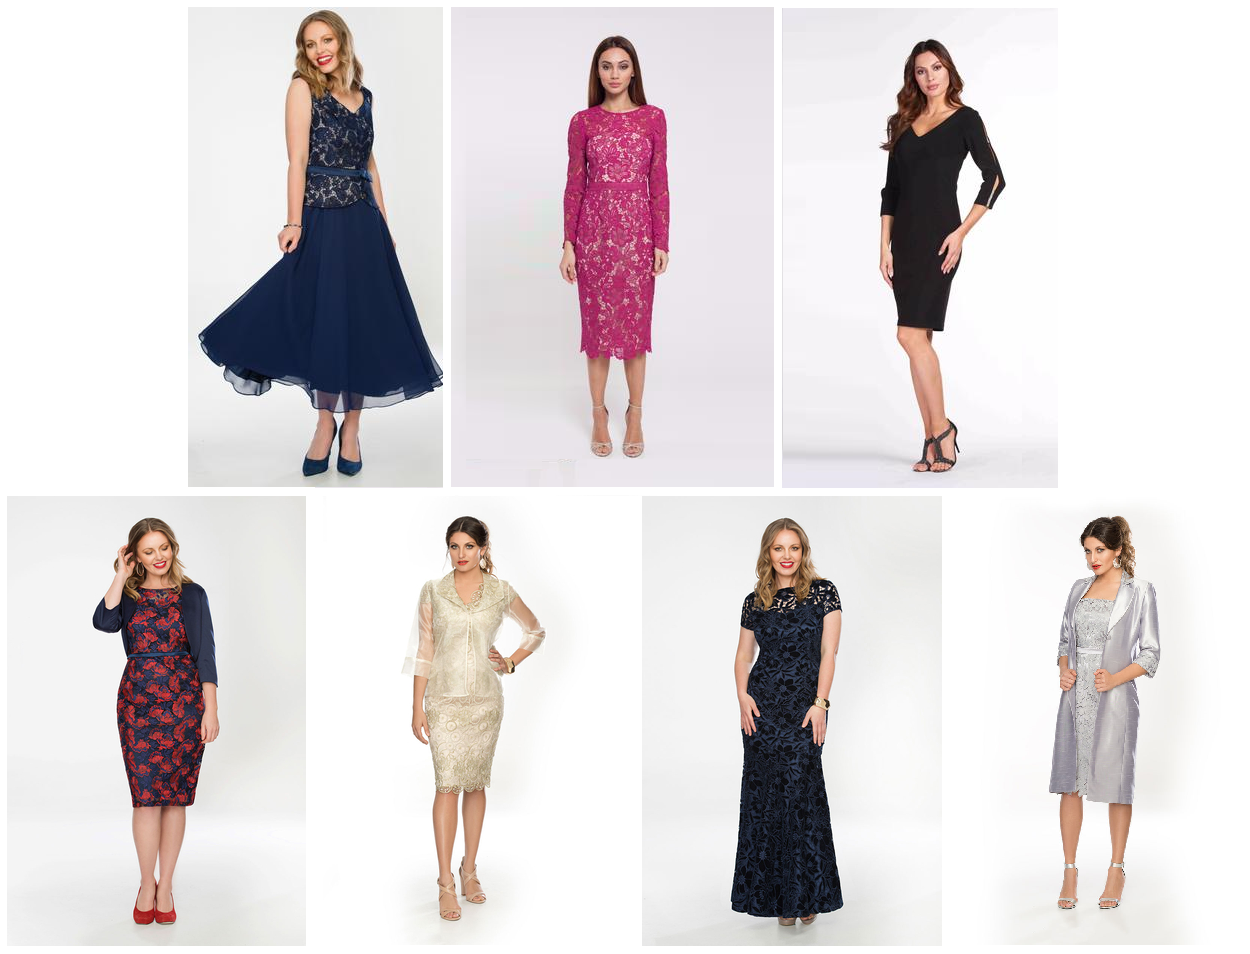 Isabella Fashions | Mother of the bride dresses, plus sizes, and ...